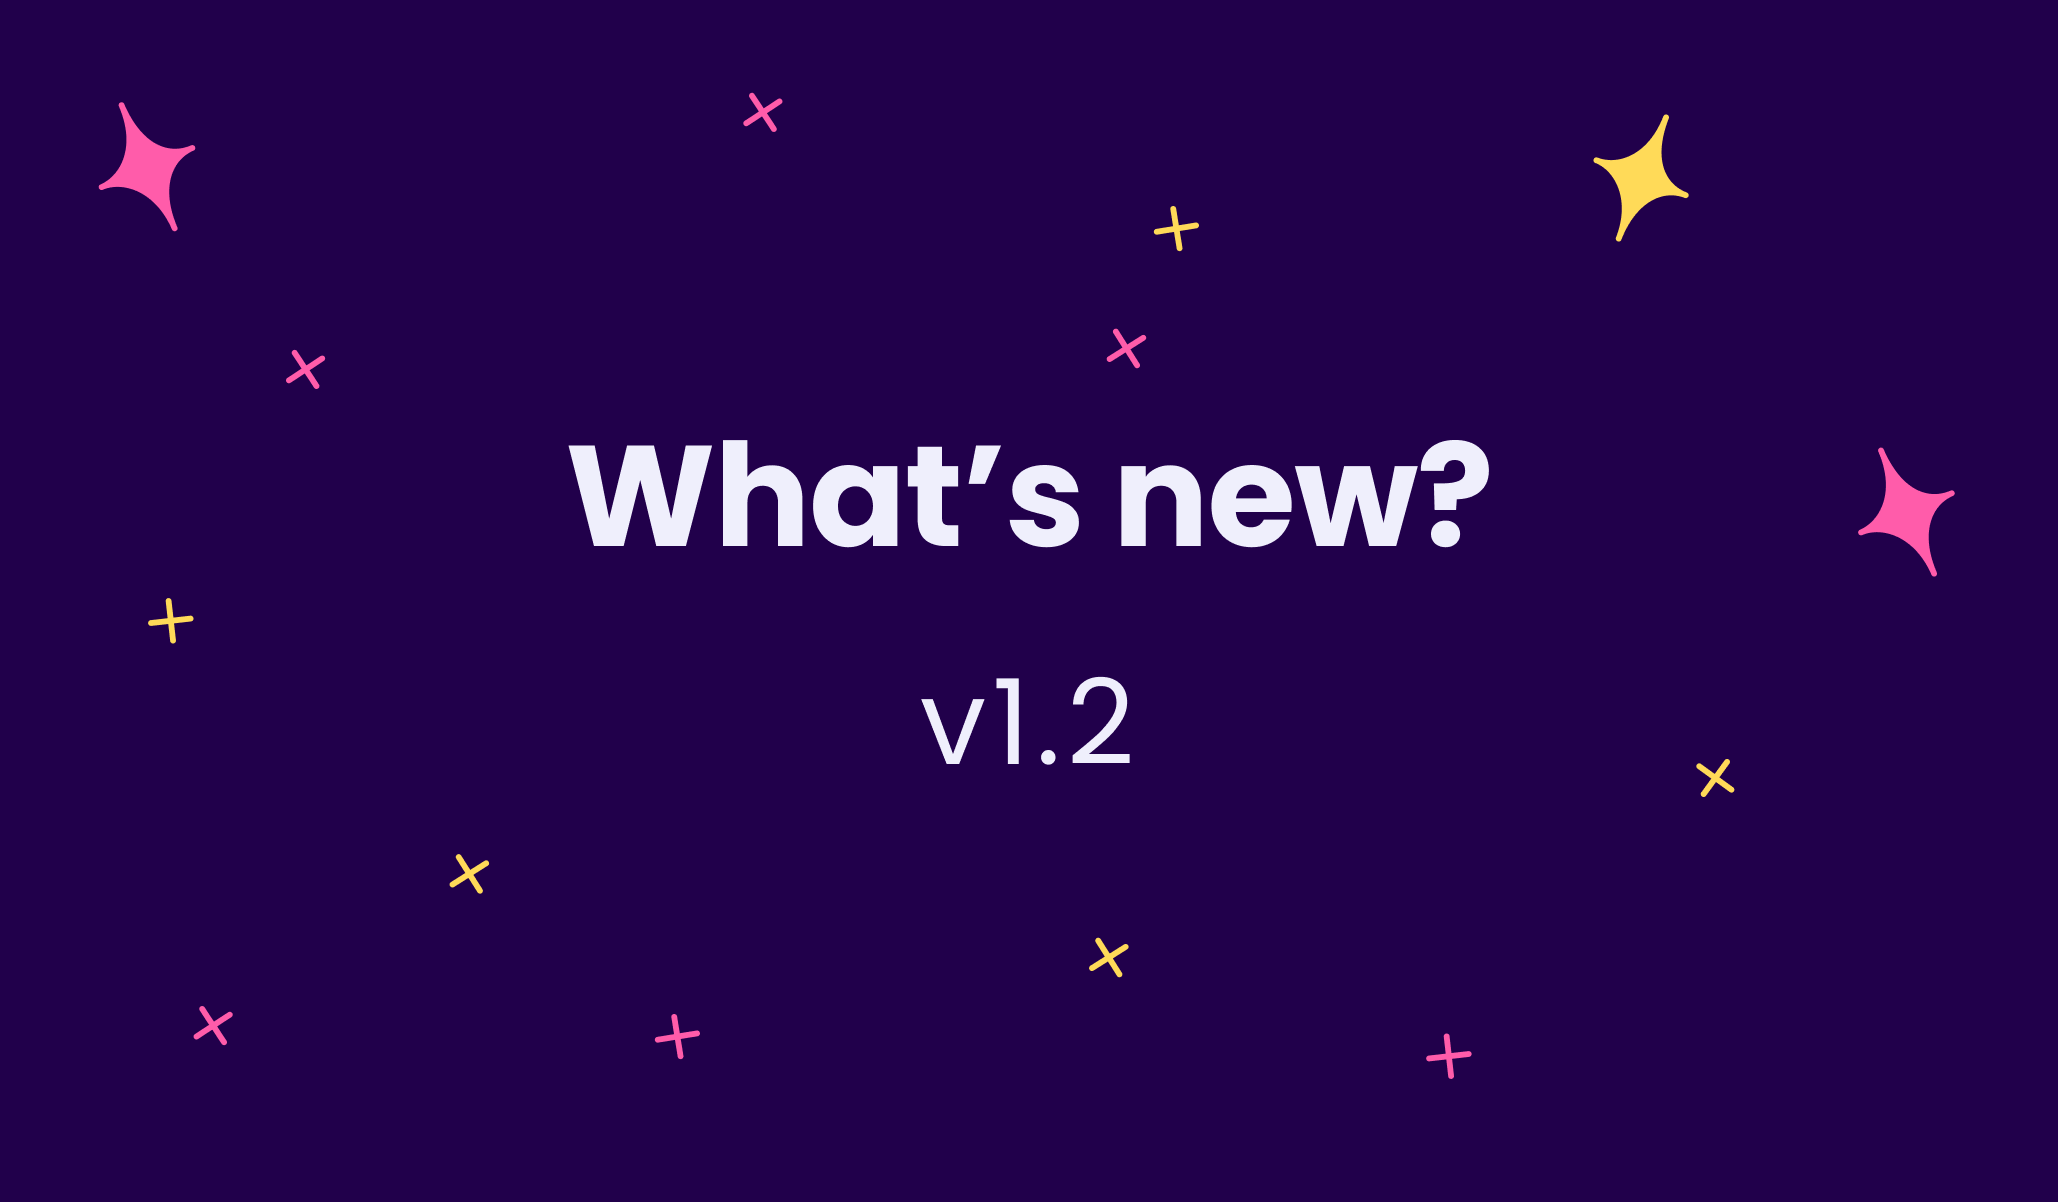 What's new in v1.2?